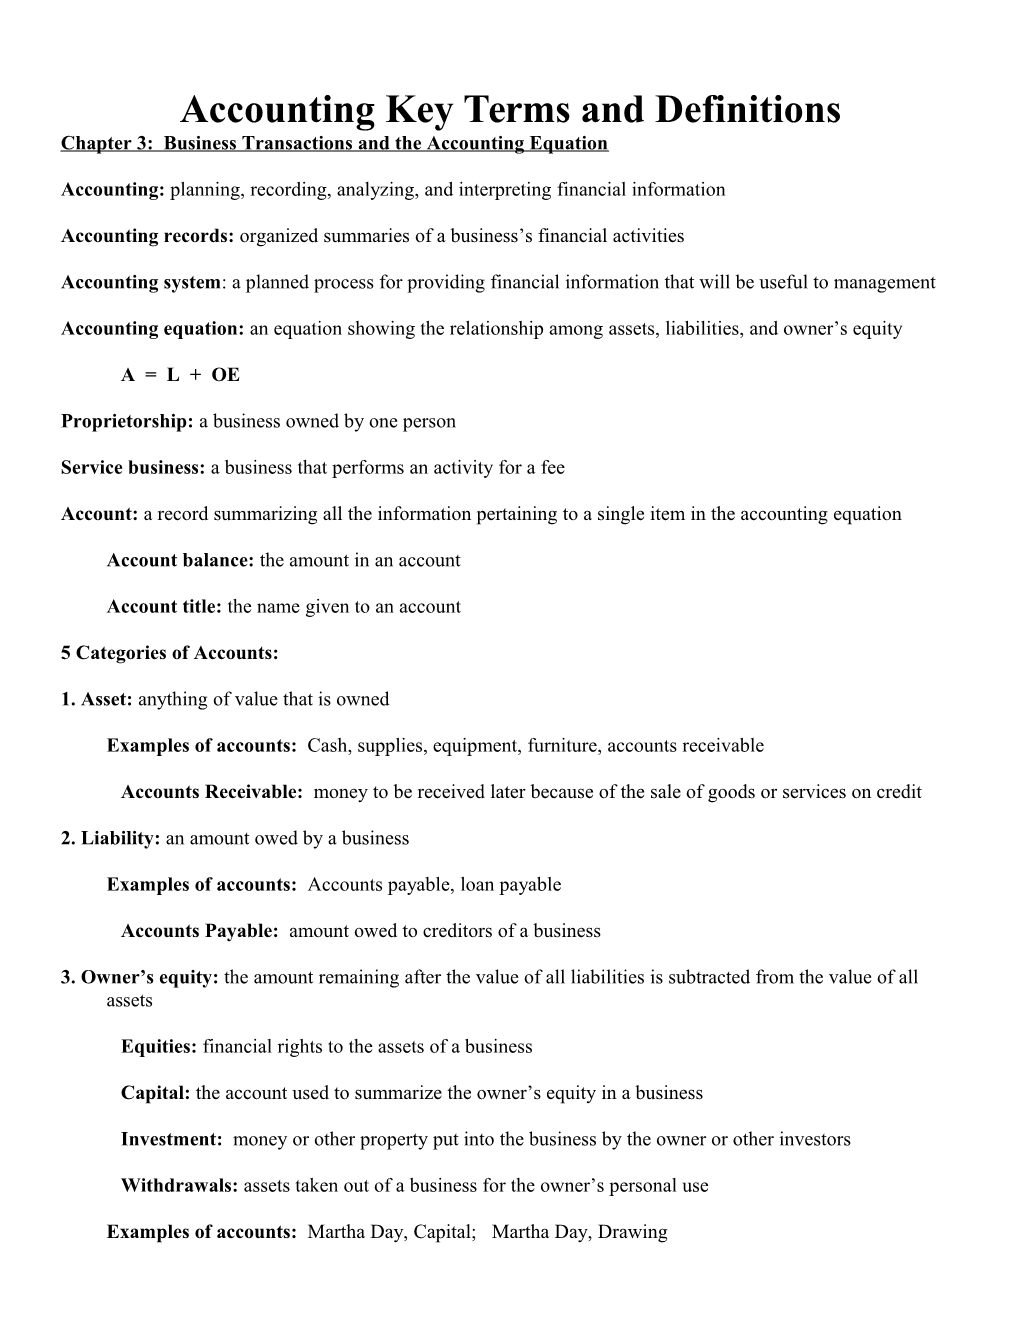 Accounting Key Terms and Definitions